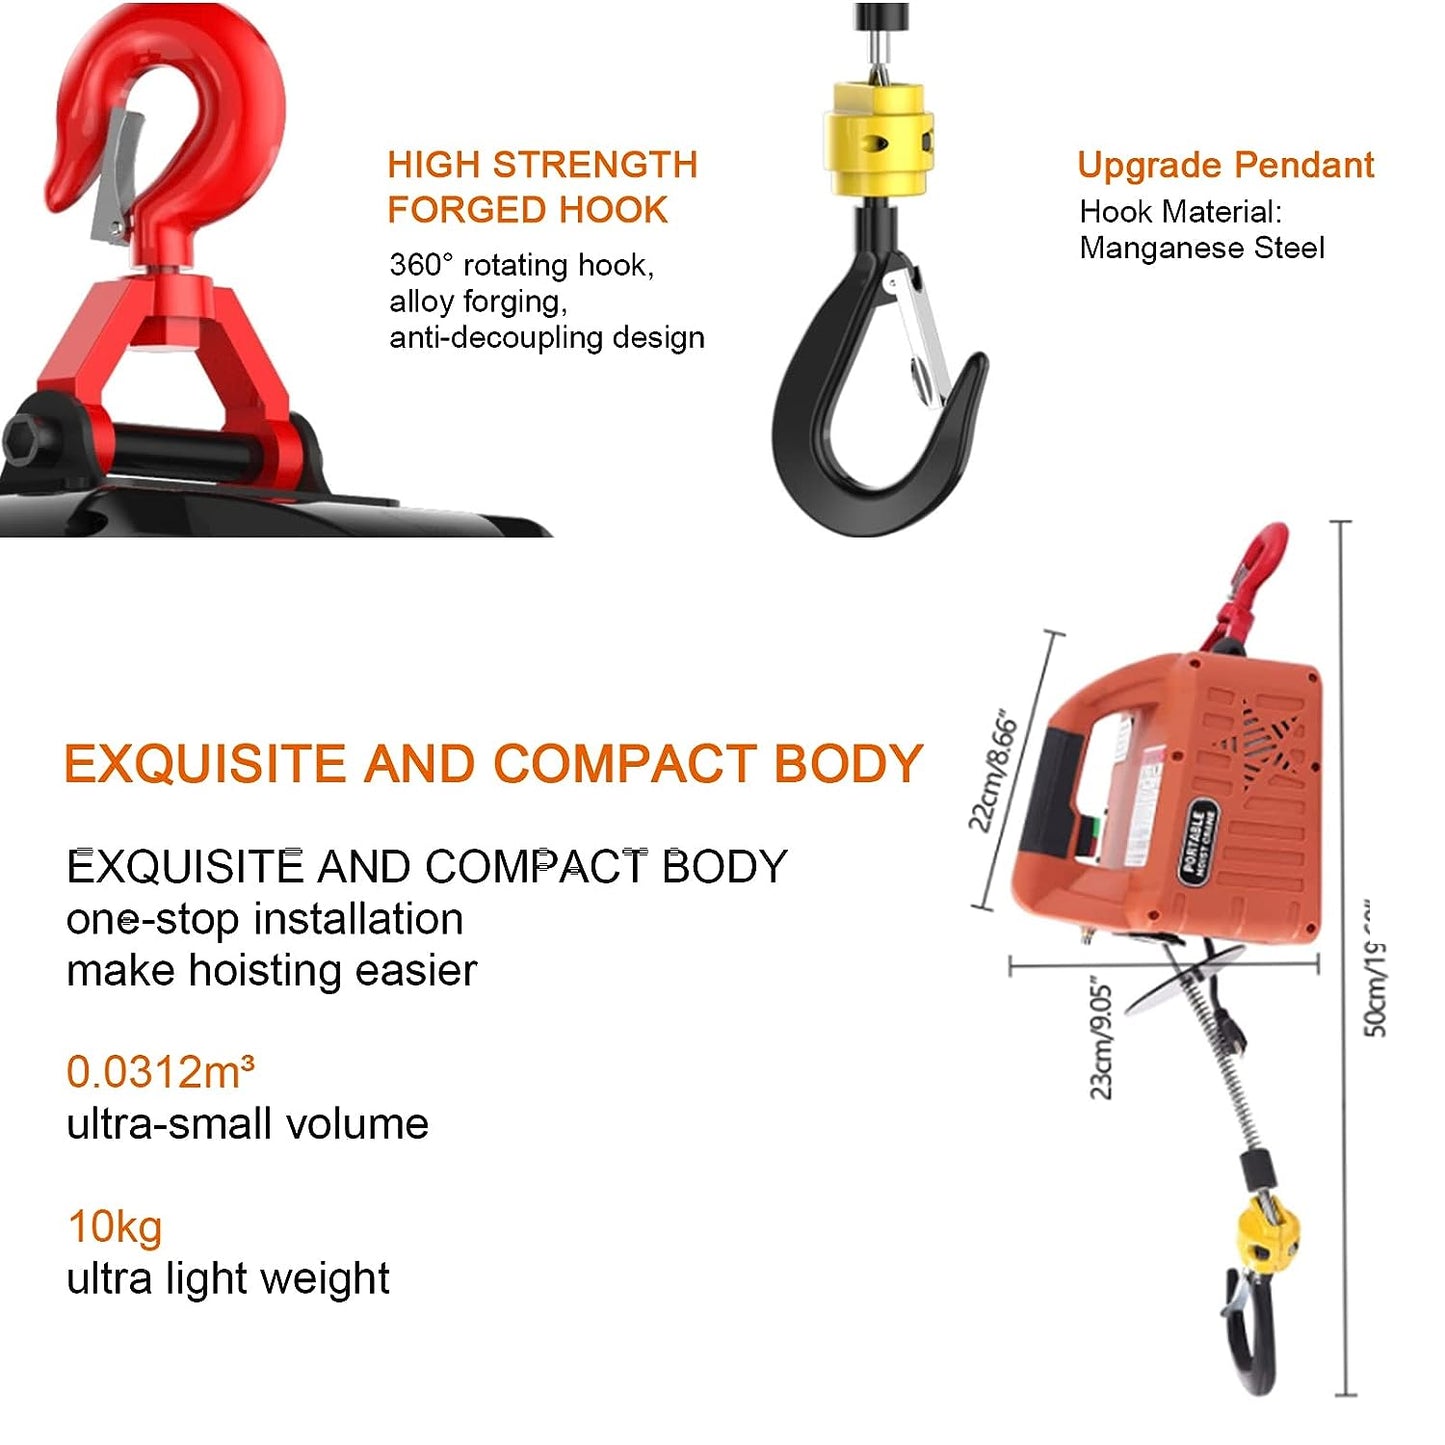 Electric Hoist Winch,1100LBS Portable Electric Winch,1500W 110V Power Winch Crane,25FT Lifting Height,Household Winch with Condole Belt,for Homes, Factories, Warehouses